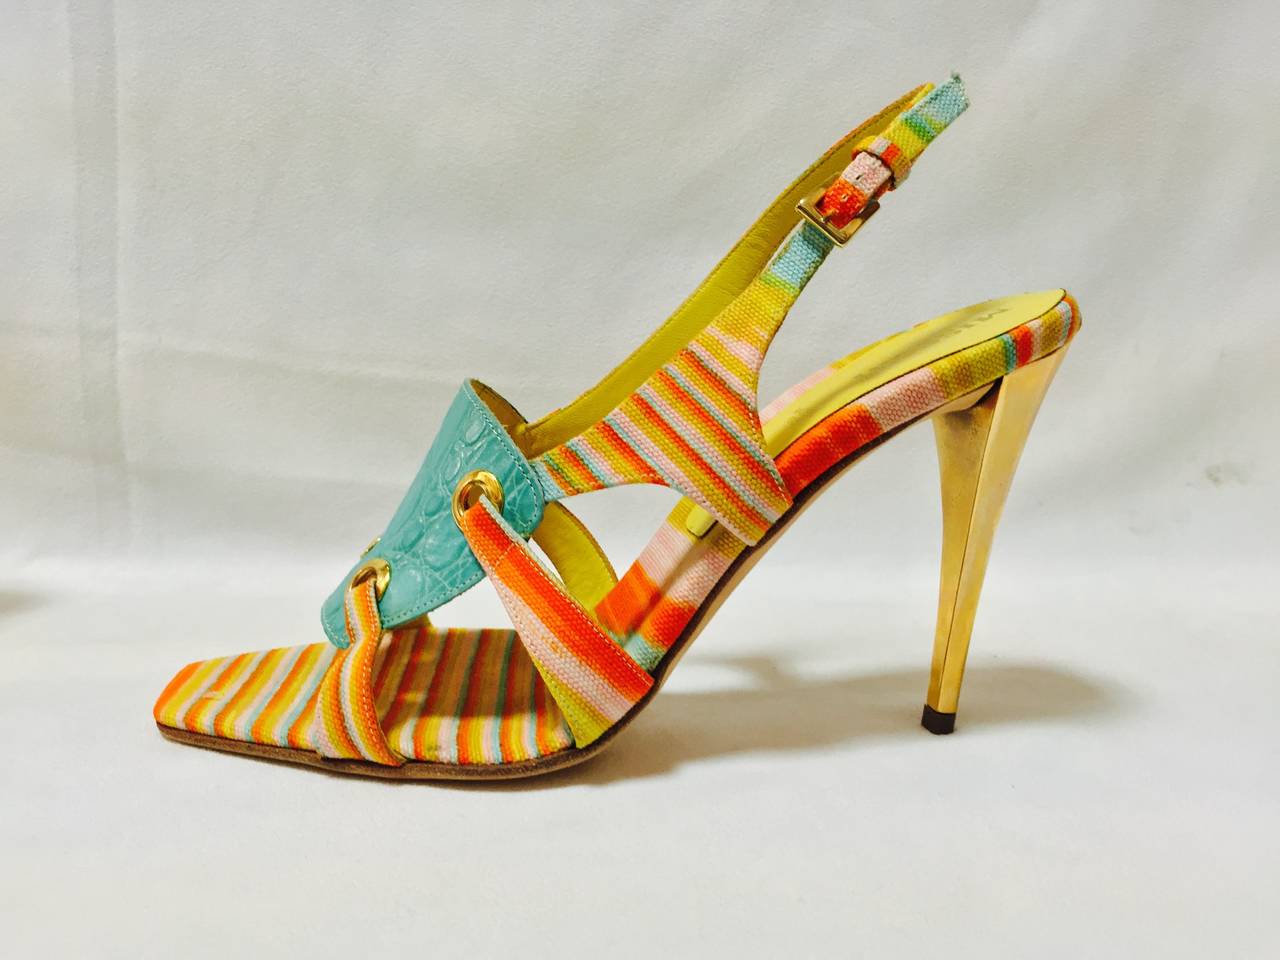 Mixed Media Strappy High Heel Sandals are true to the design aesthetic of Missoni!  Multicolor?  Yes!  Bands of turquoise, orange, yellow and pink fabric are perfectly complemented by turquoise crocodile embossed leather and citrus yellow smooth